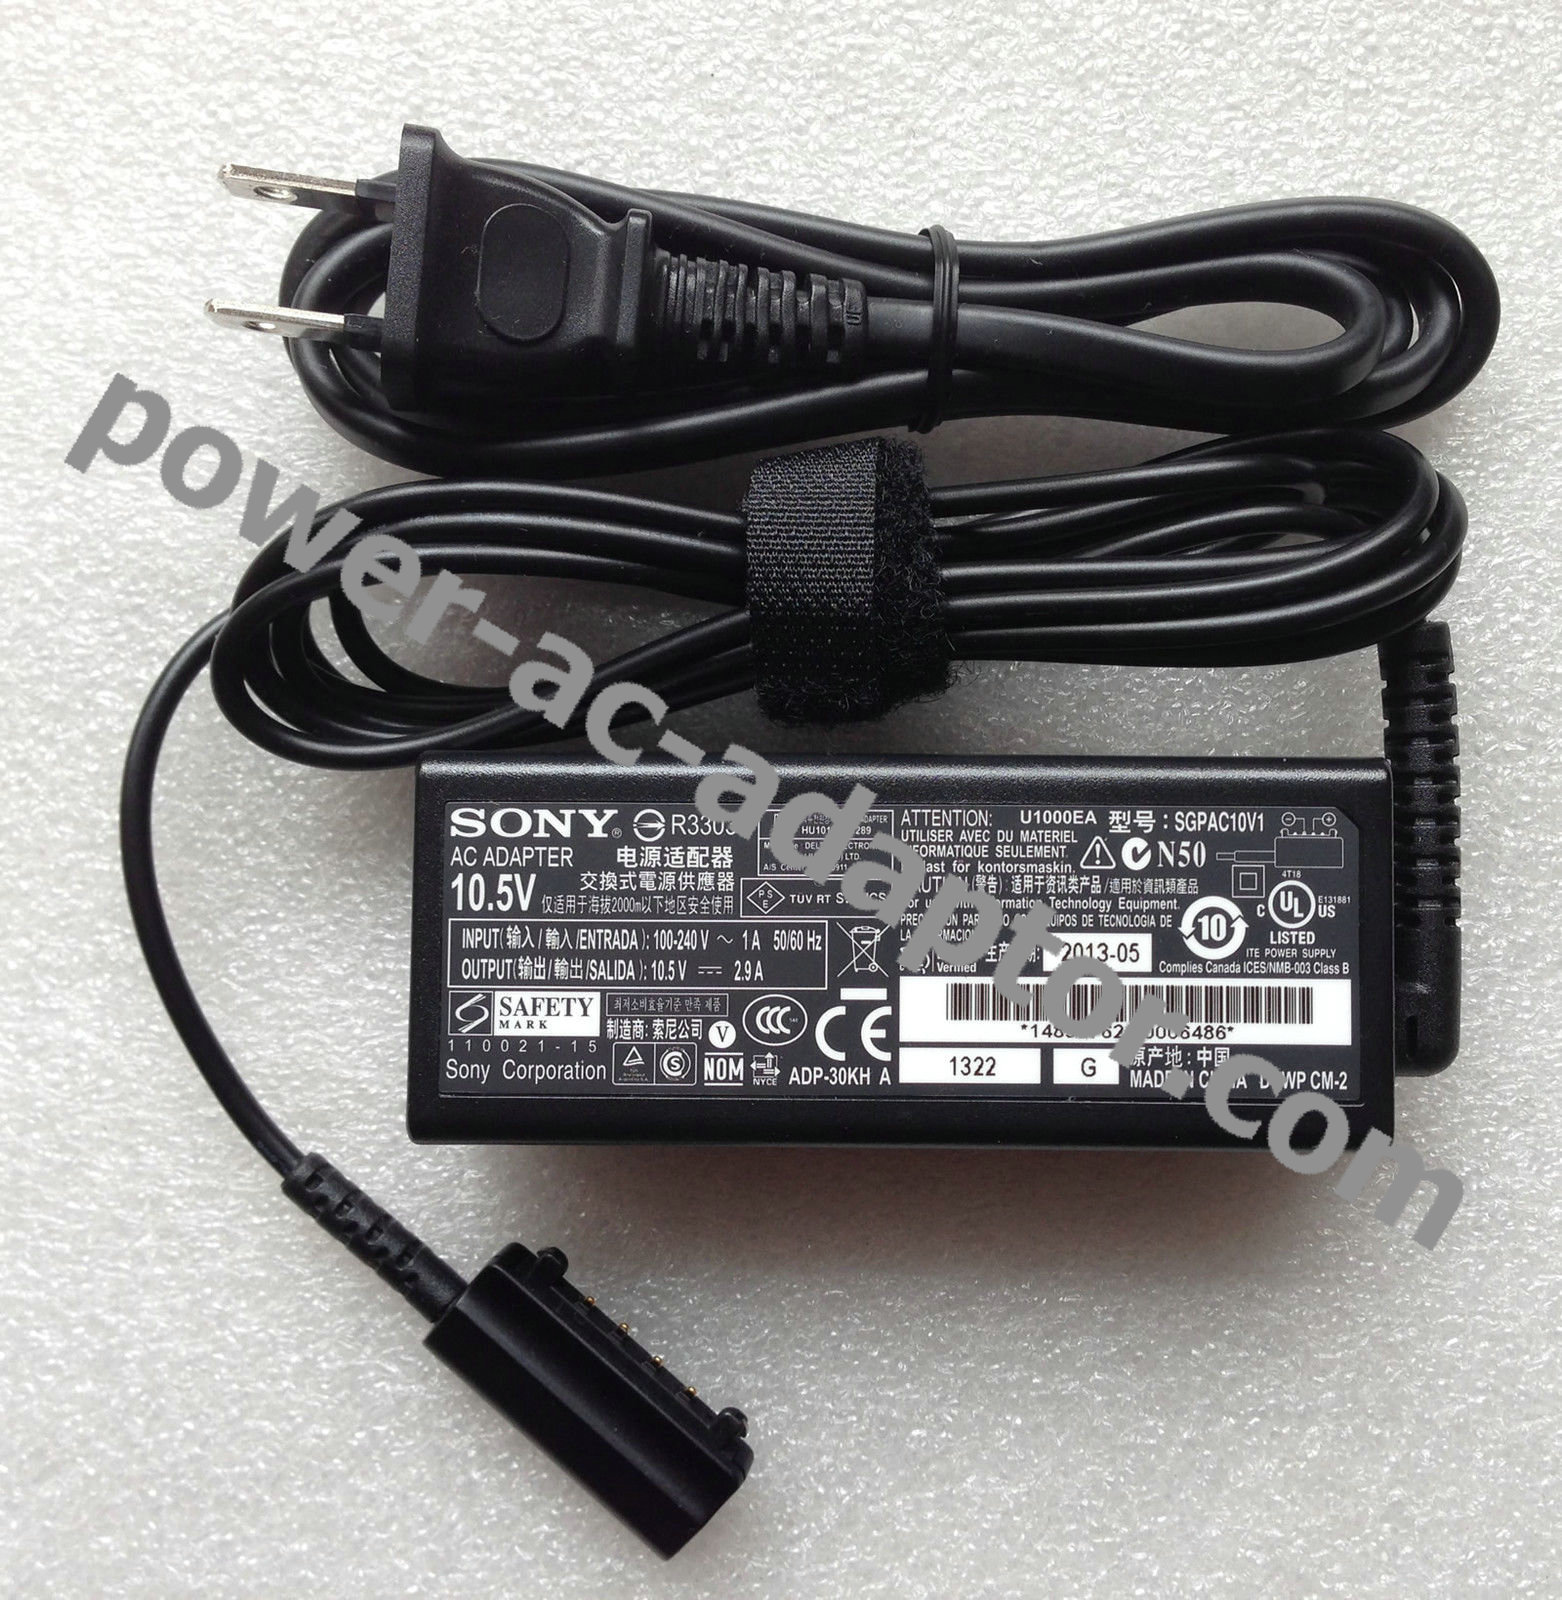 Genuine Sony SGPT111AE SGPAC10V1 AC Adapter Charger Cord